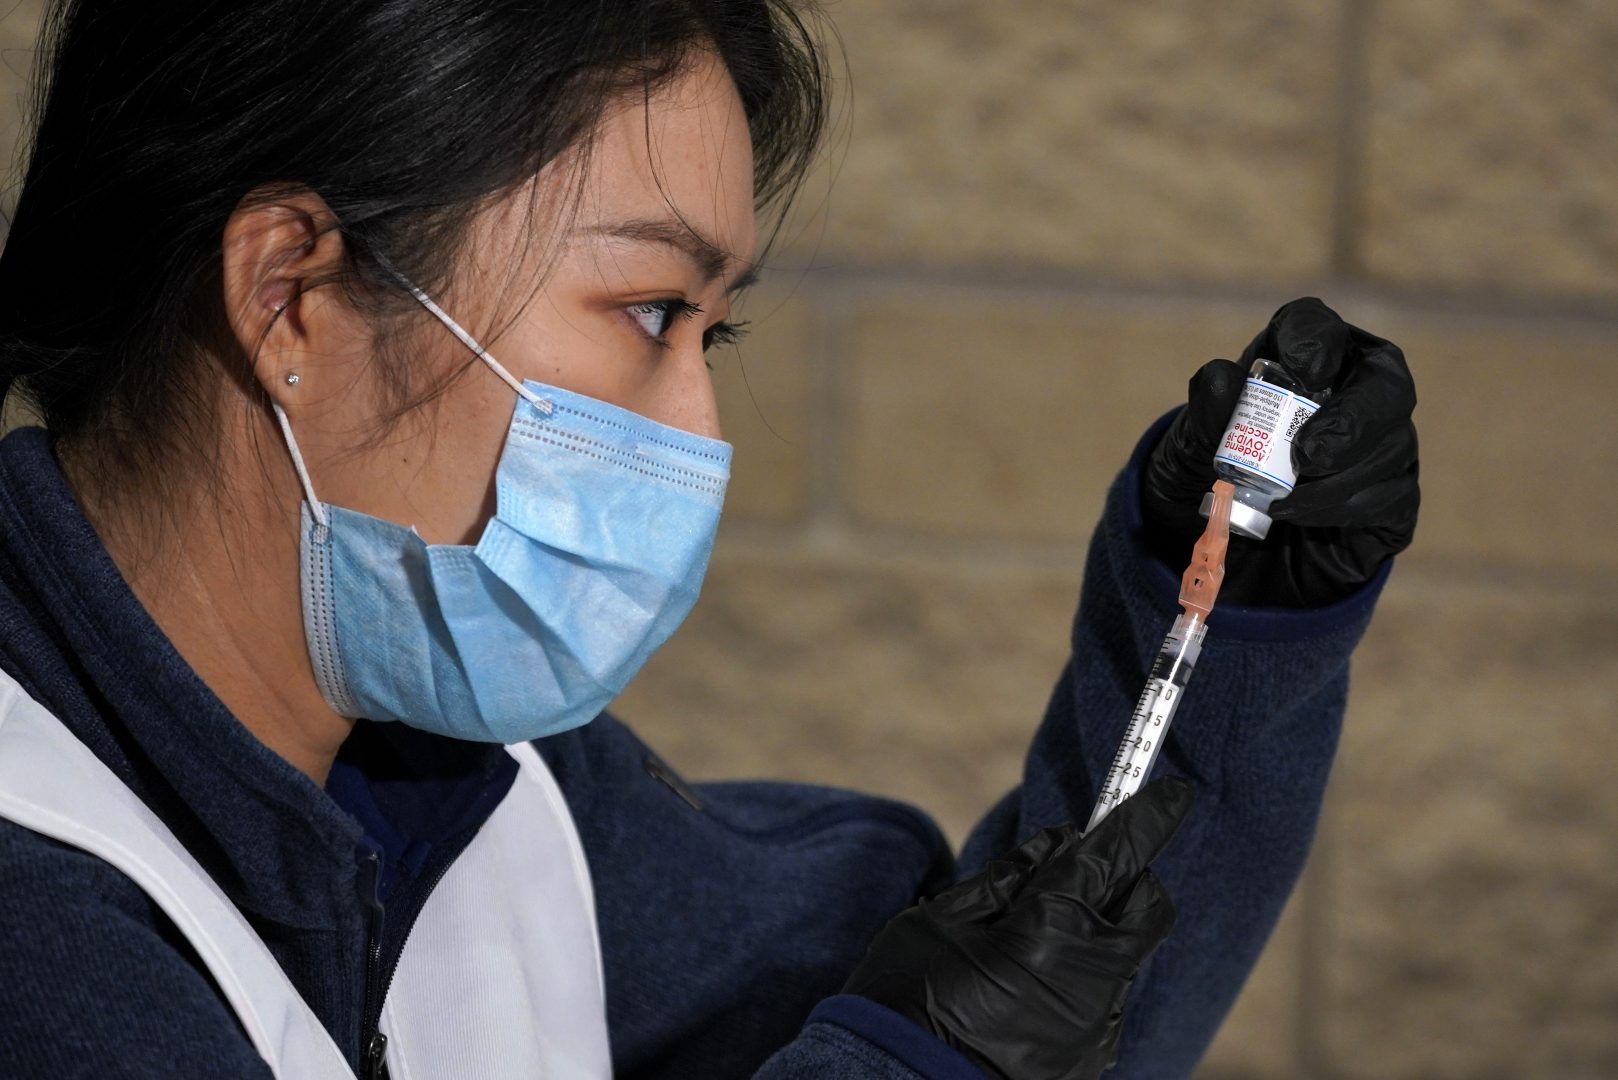 University of Pittsburgh Pharmacy student Edith Wang loads a syringe with a dose of the Moderna COVID-19 Vaccine, during a vaccination clinic hosted by the University of Pittsburgh and the Allegheny County Health Department at the Petersen Events Center, in Pittsburgh, Thursday, Jan. 28, 2021.